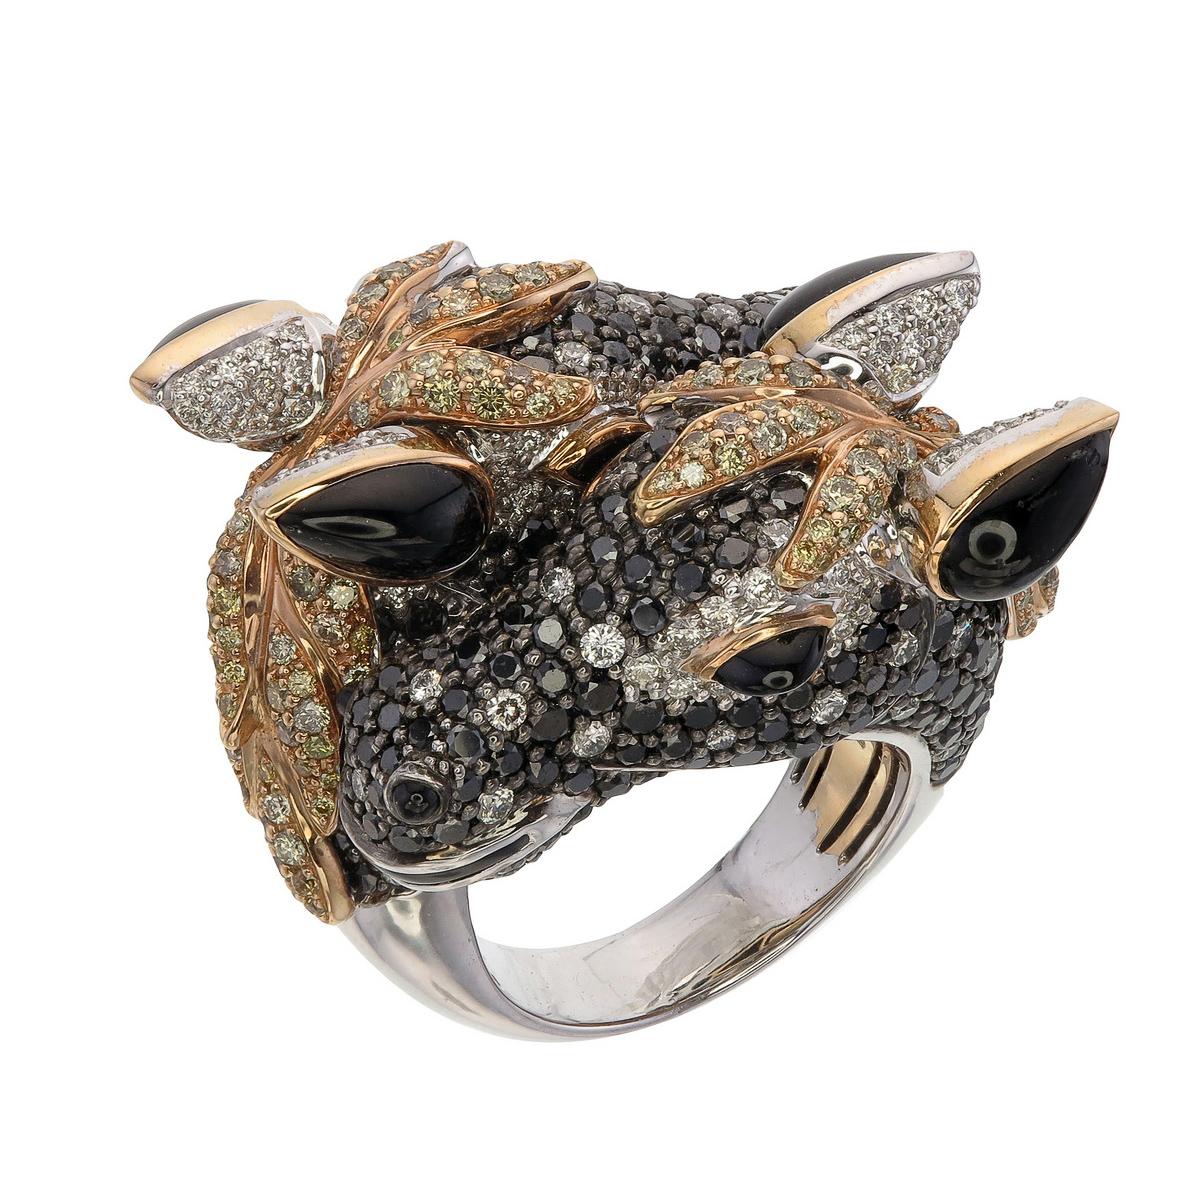 Sauvage Collection-one of a kind

Introducing our exquisite Two-Faced Horse Ring, a true masterpiece that seamlessly combines the grace and power of these majestic creatures with the timeless elegance of black and white diamonds.
Crafted with